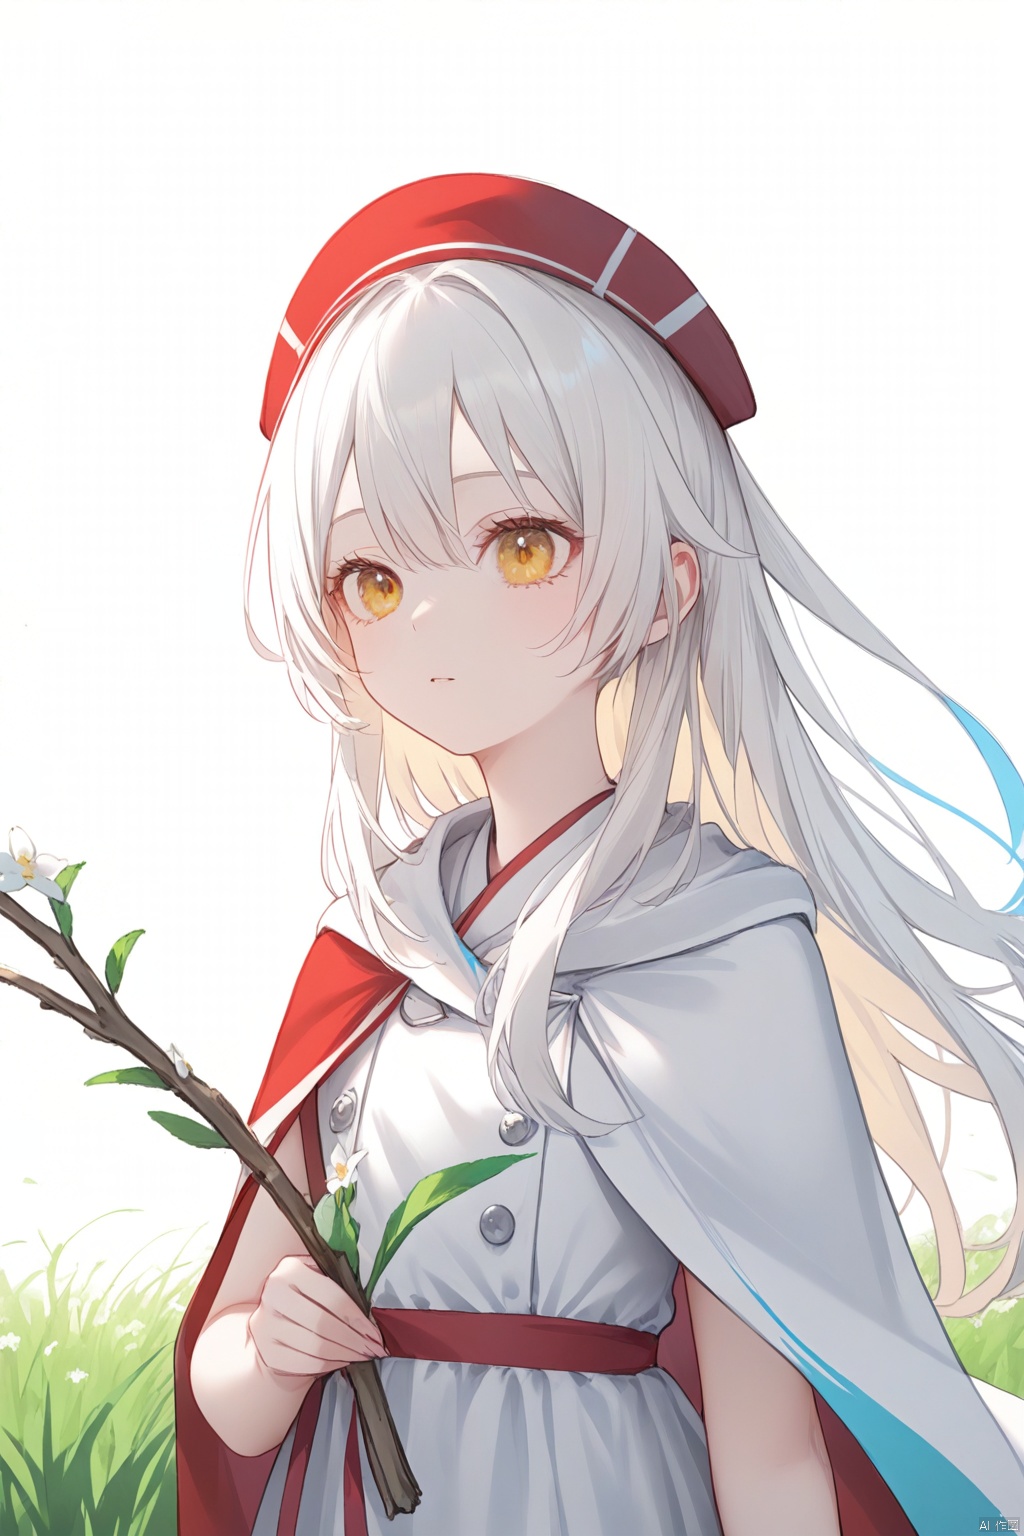  (1girl:1.2),(white hairr:1.2),long hair,yellow eyes,red headdress,
(white dress:1.2),(white shoulder cape),outline,
(She Hold the branches with small white flowers:1.23),
(white background:1.3),(grass:1.15),(Thymus:1.2),(white flowers),smoke,(upper body:1.3),(A splash of colored paint1.15),Movie poster,